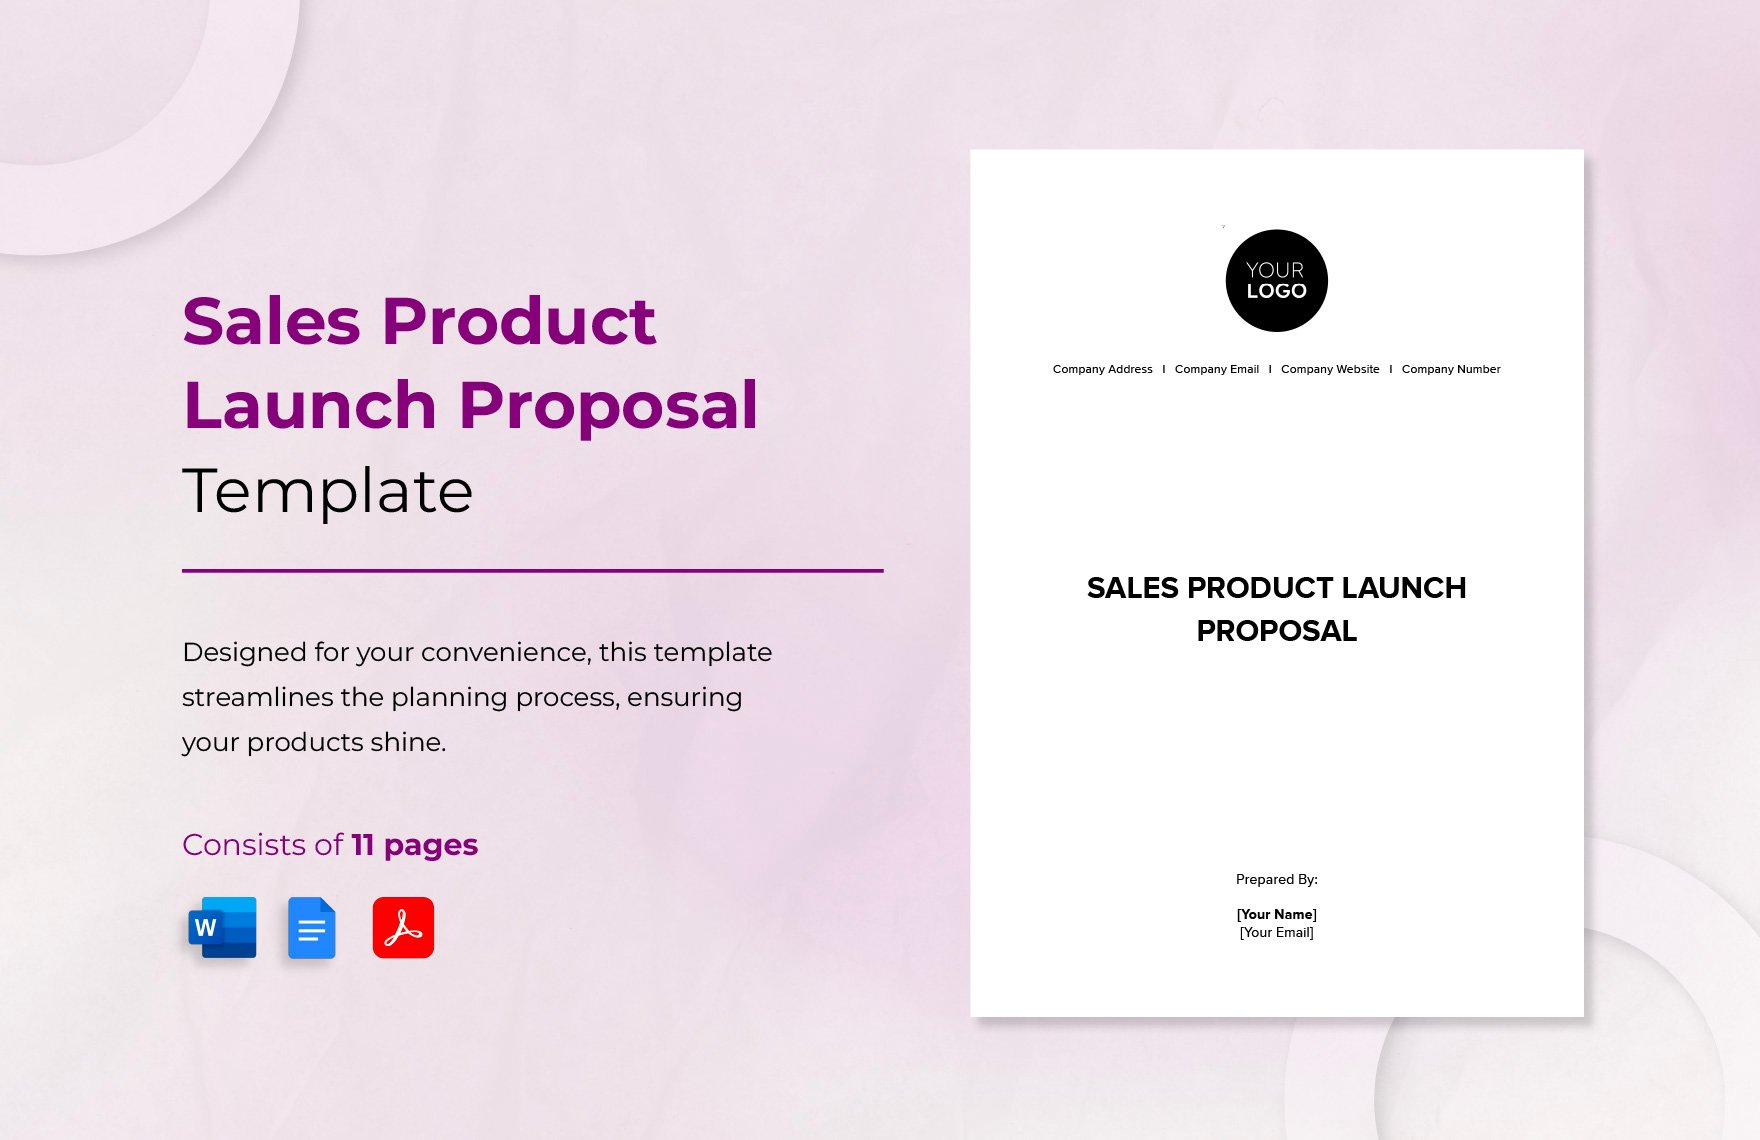 Sales Product Launch Proposal Template in Word, Google Docs, PDF